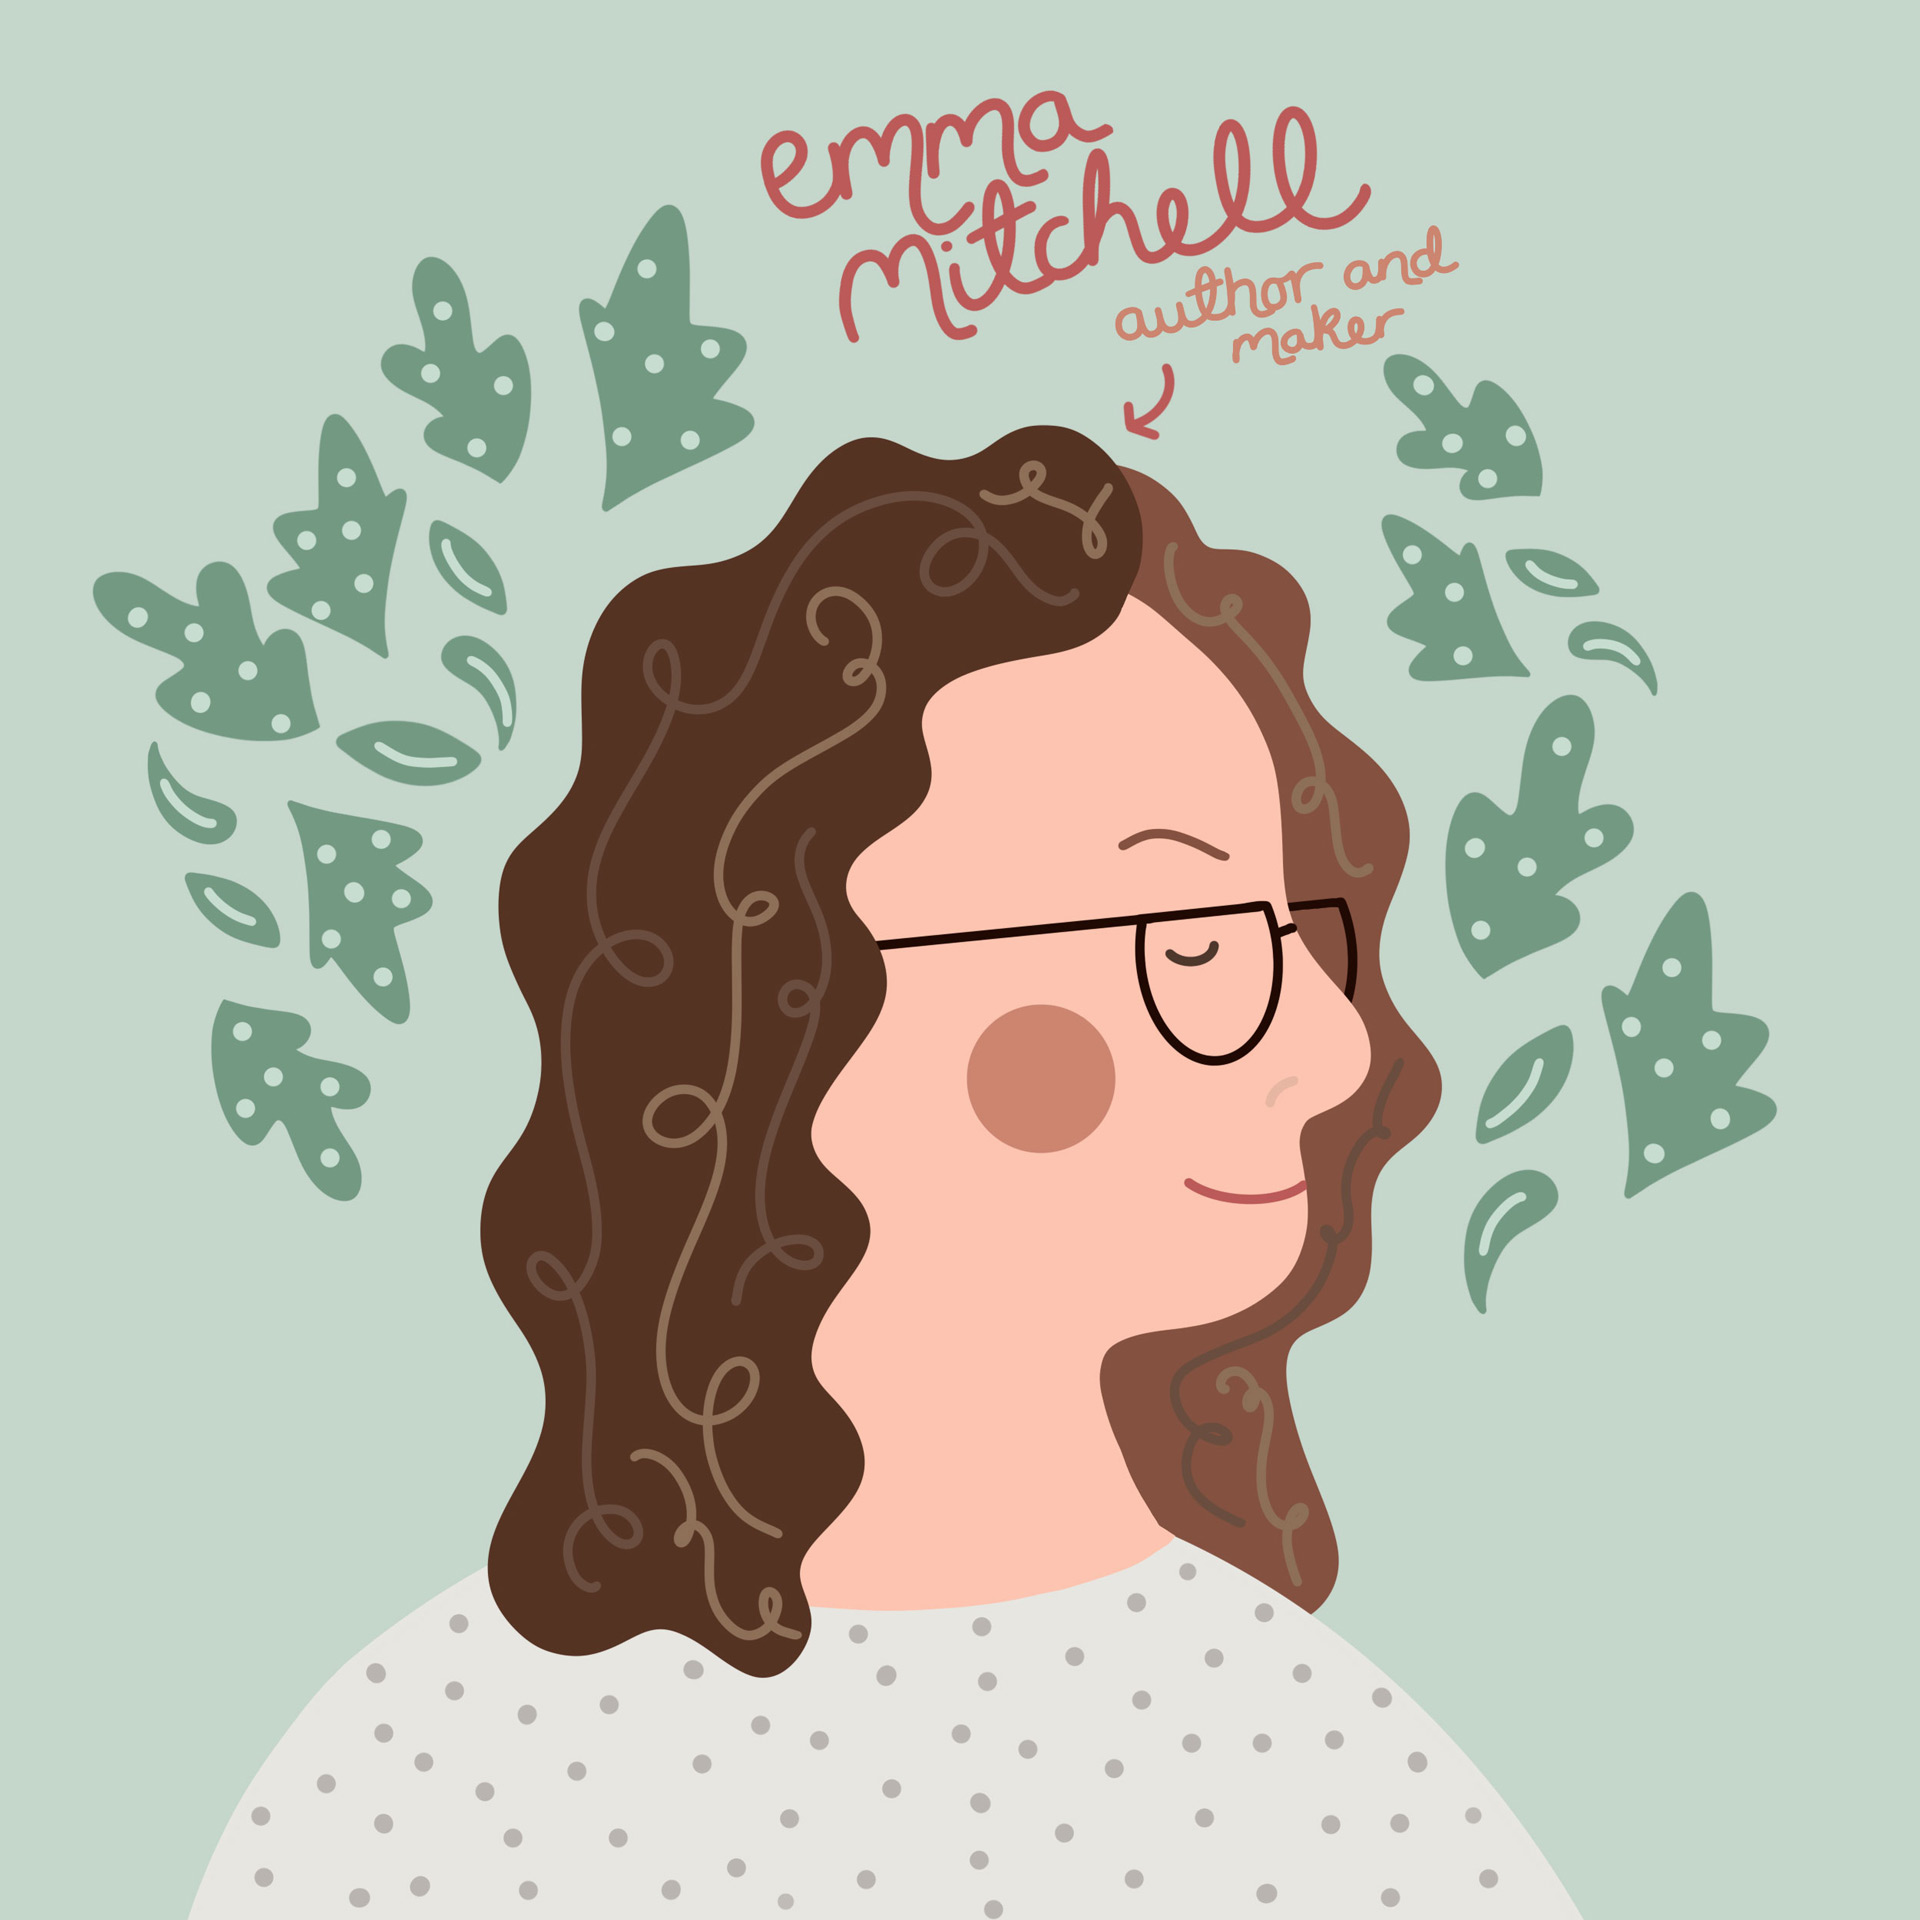 A side-profile portrait of Emma Mitchell illustrated in a whimsical and playful illustration style. Emma is depicted front-and-centre in a square image, set against a pale green background adorned with leaves. A hand-drawn caption accompanies the portrait, stating 'Emma Mitchell: Author and Maker'. The illustration features a harmonious colour palette inspired by nature.